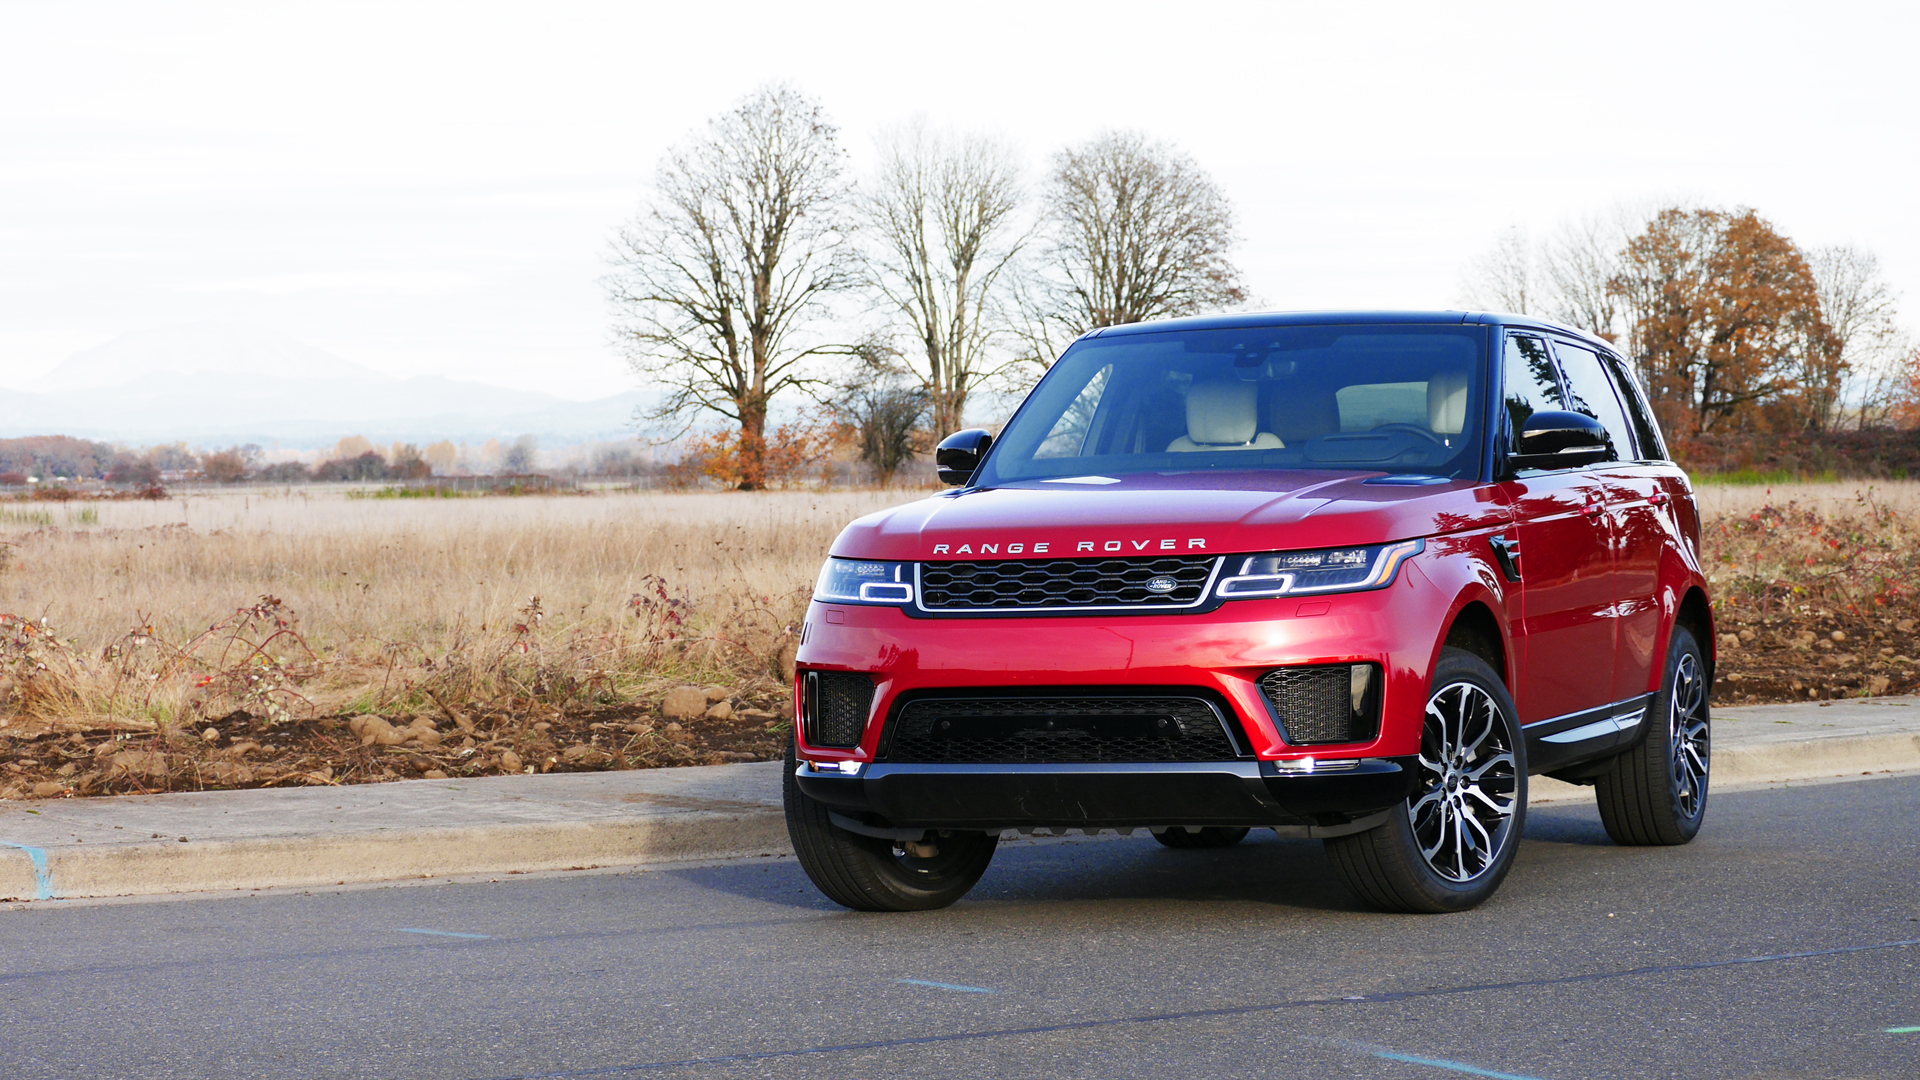 Range Rover Models 2019  : From 30 September 2019 Spotify Will No Longer Be Supporting The Incontrol Apps Access.